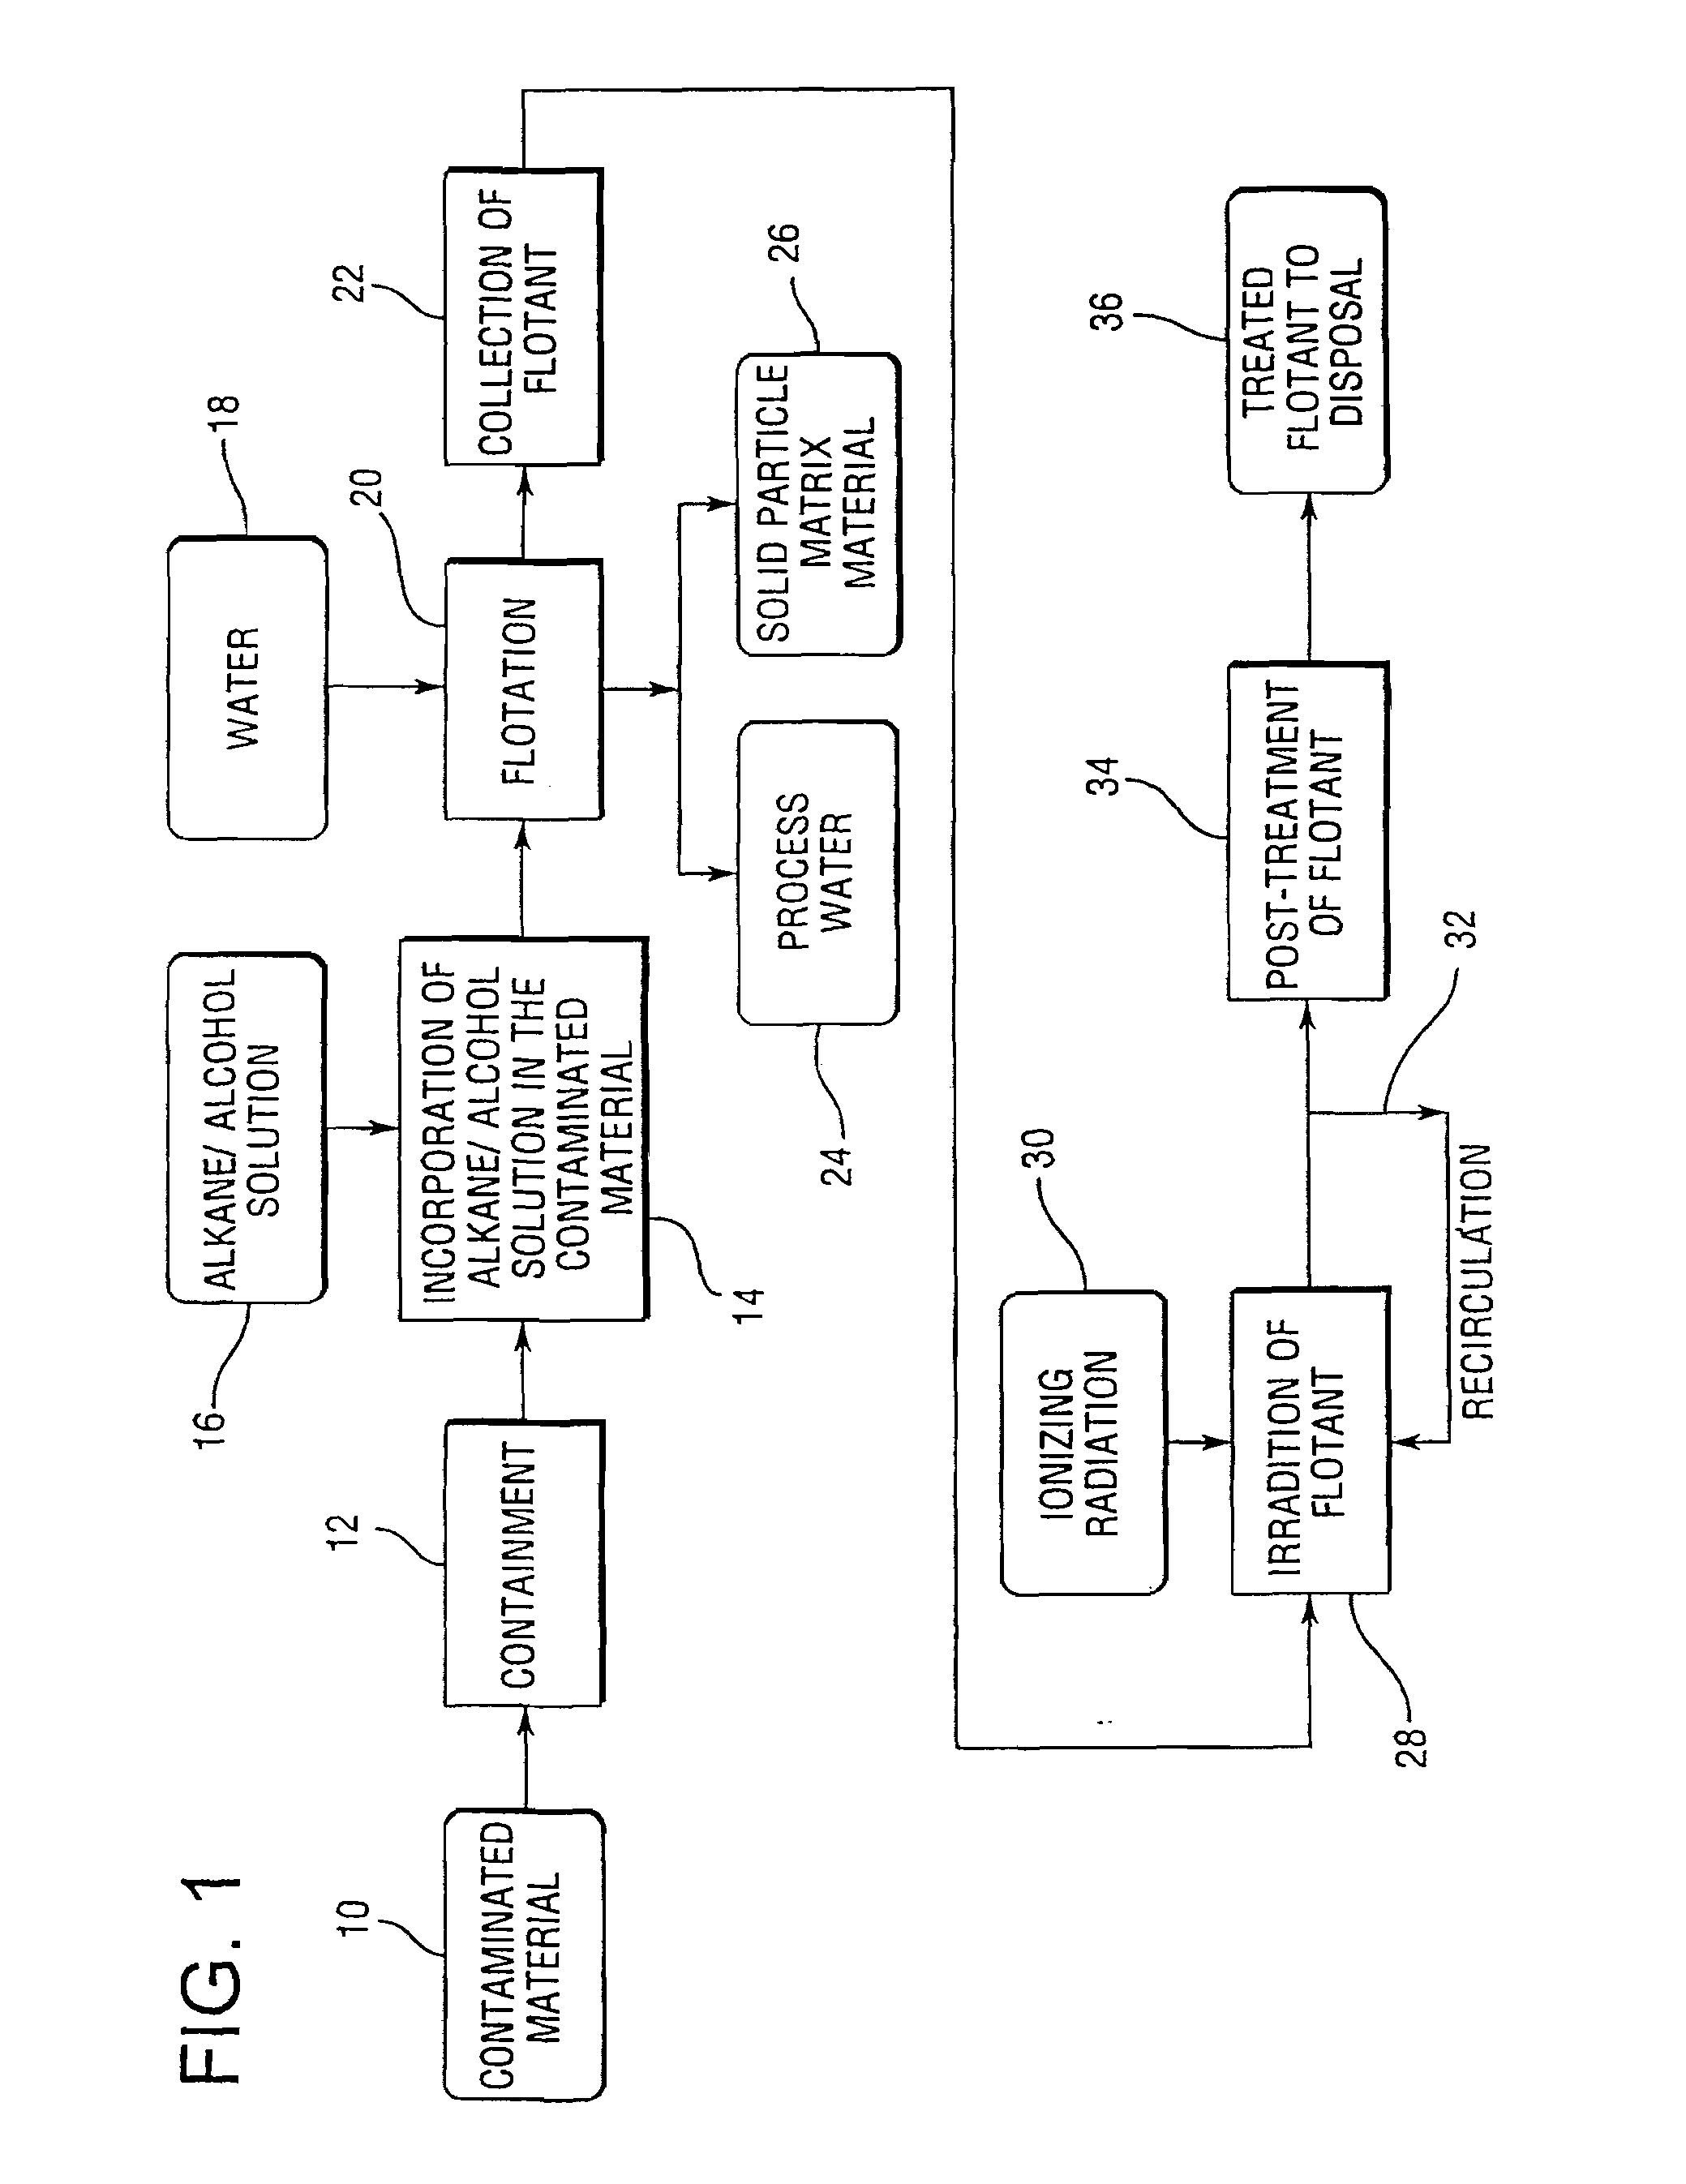 Process for the Solvent Extraction for the Radiolysis and Dehalogenation of Halogenated Organic Compounds in Soils, Sludges, Sediments, and Slurries